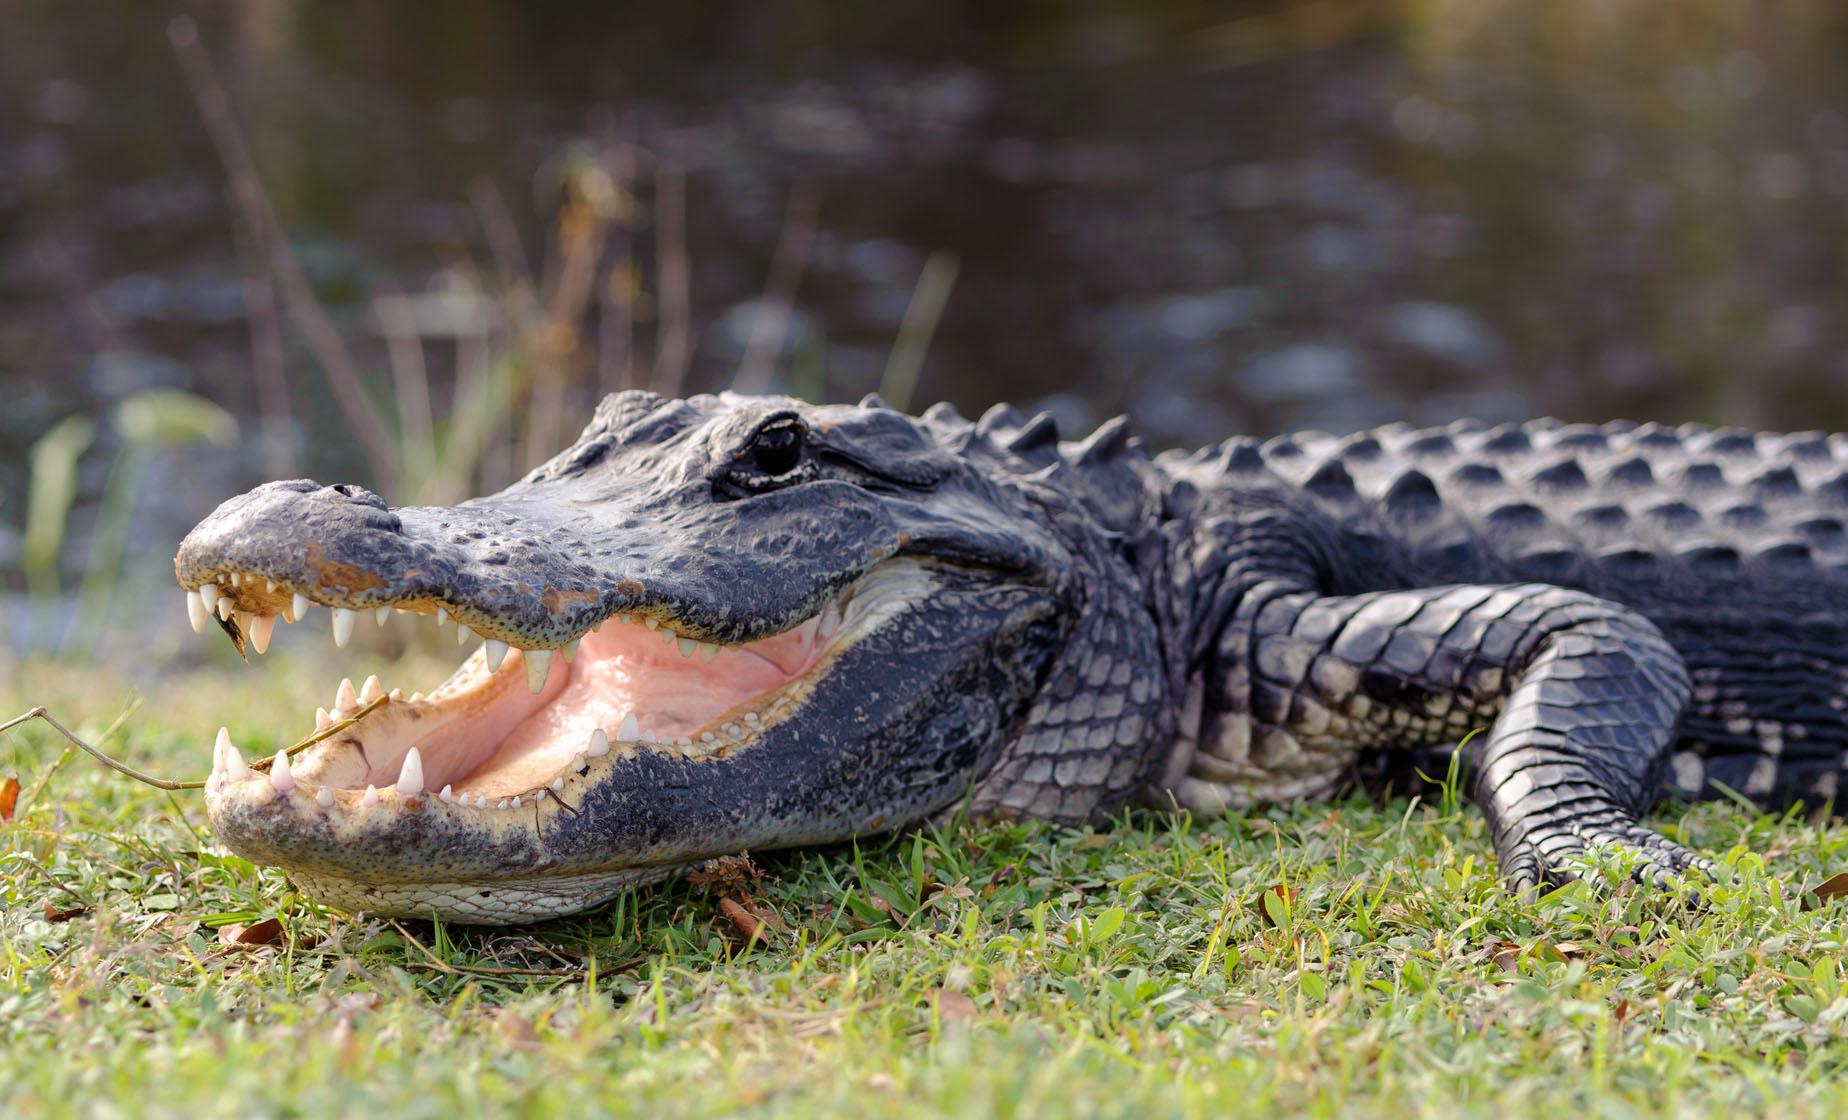 Orlando Cruise Excursions | Alligator Encounter and Everglades Airboat Adventure with BBQ Lunch